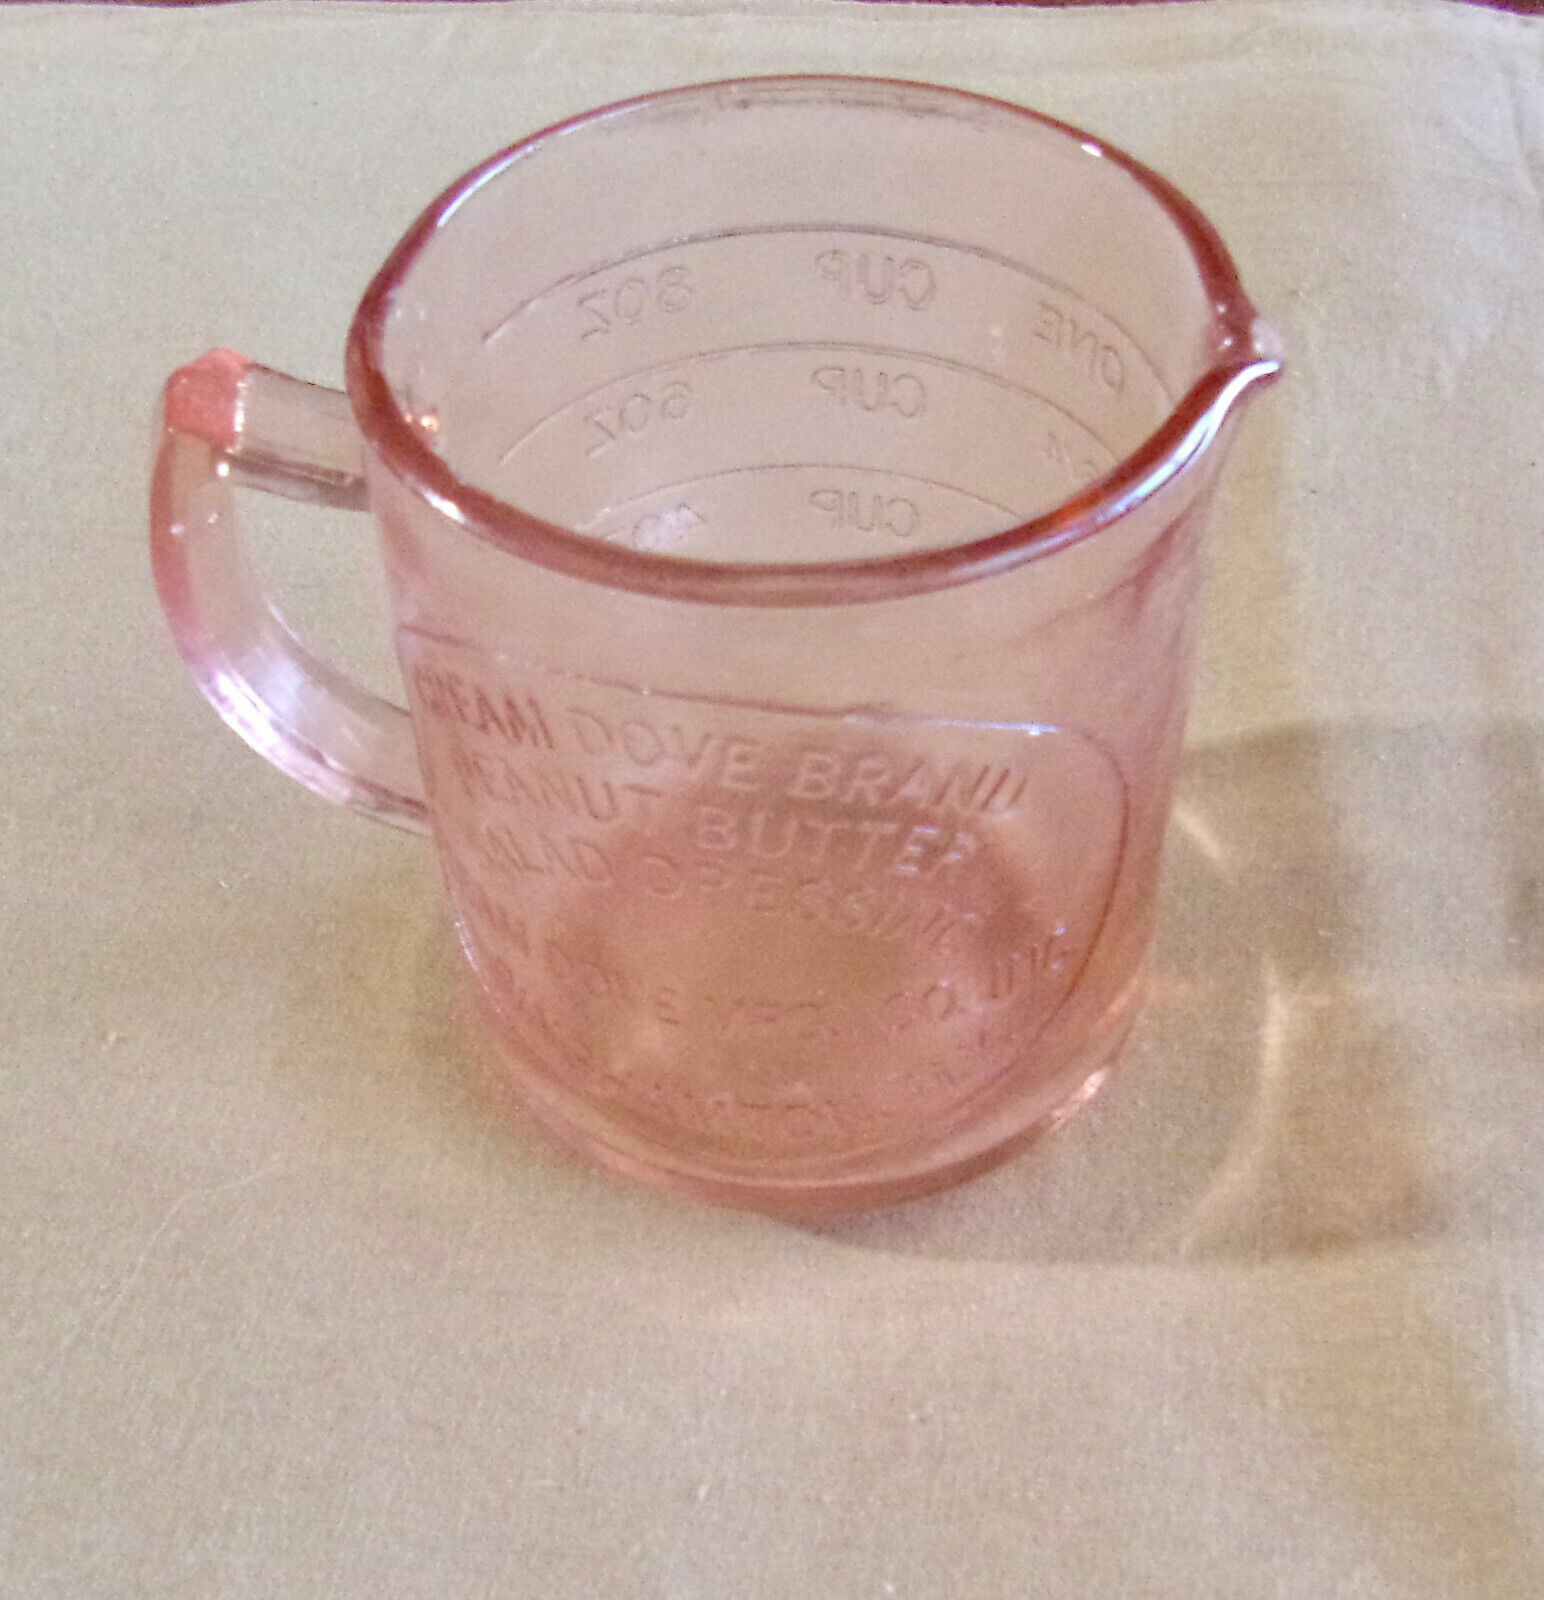 PINK DEPRESSION STYLE GLASS  1 CUP  MEASURING CUP